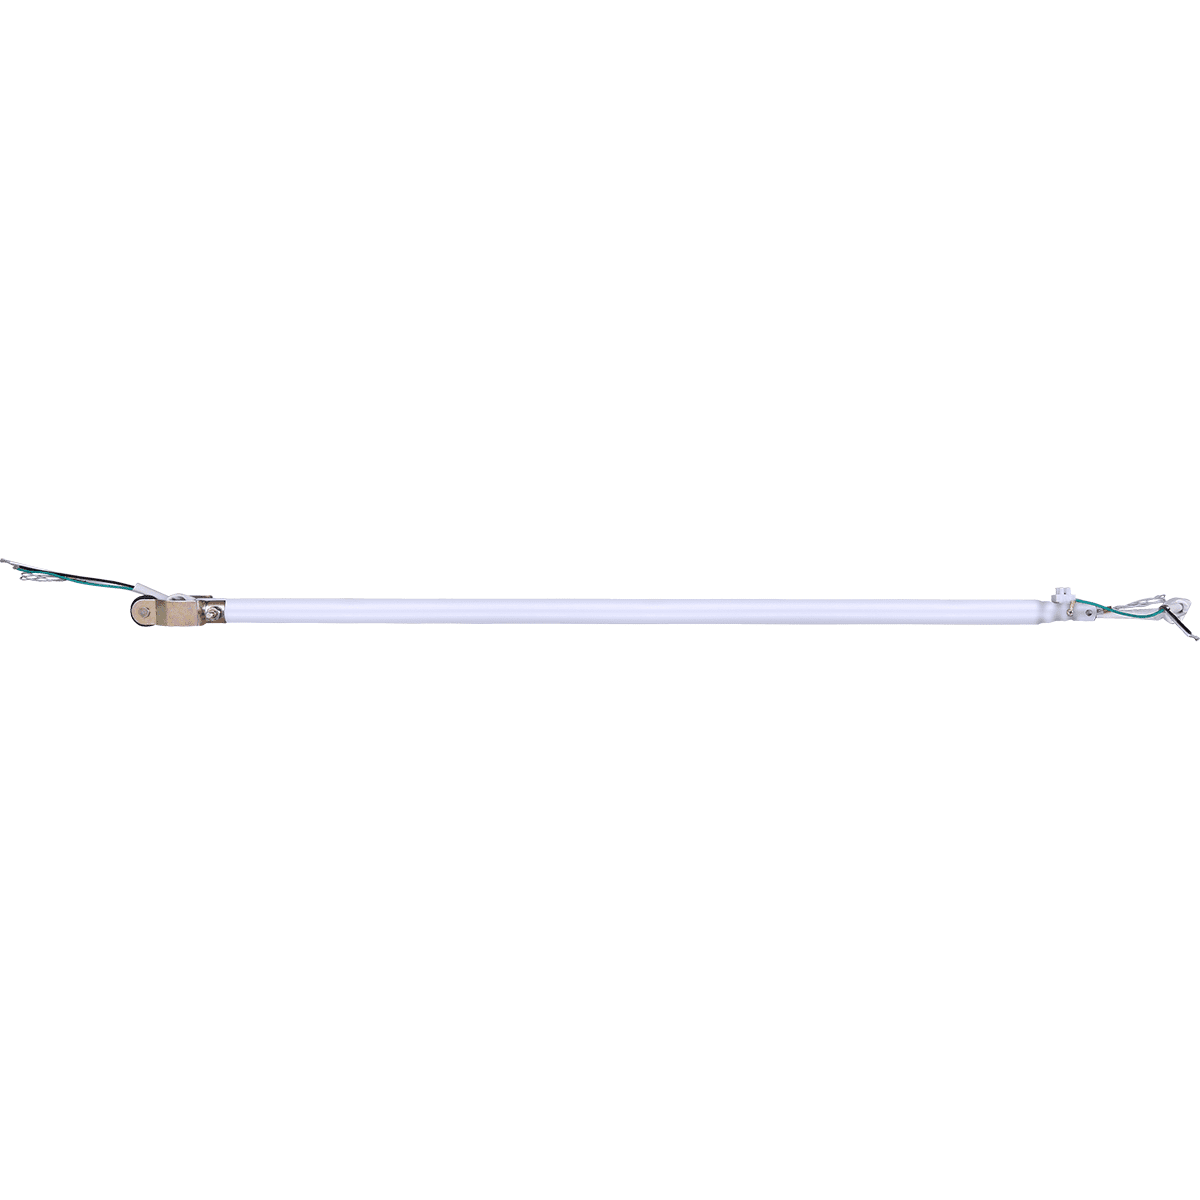 Canarm DCR3611 36-inch Downrod for High Performance CP Series Industrial Fans - White